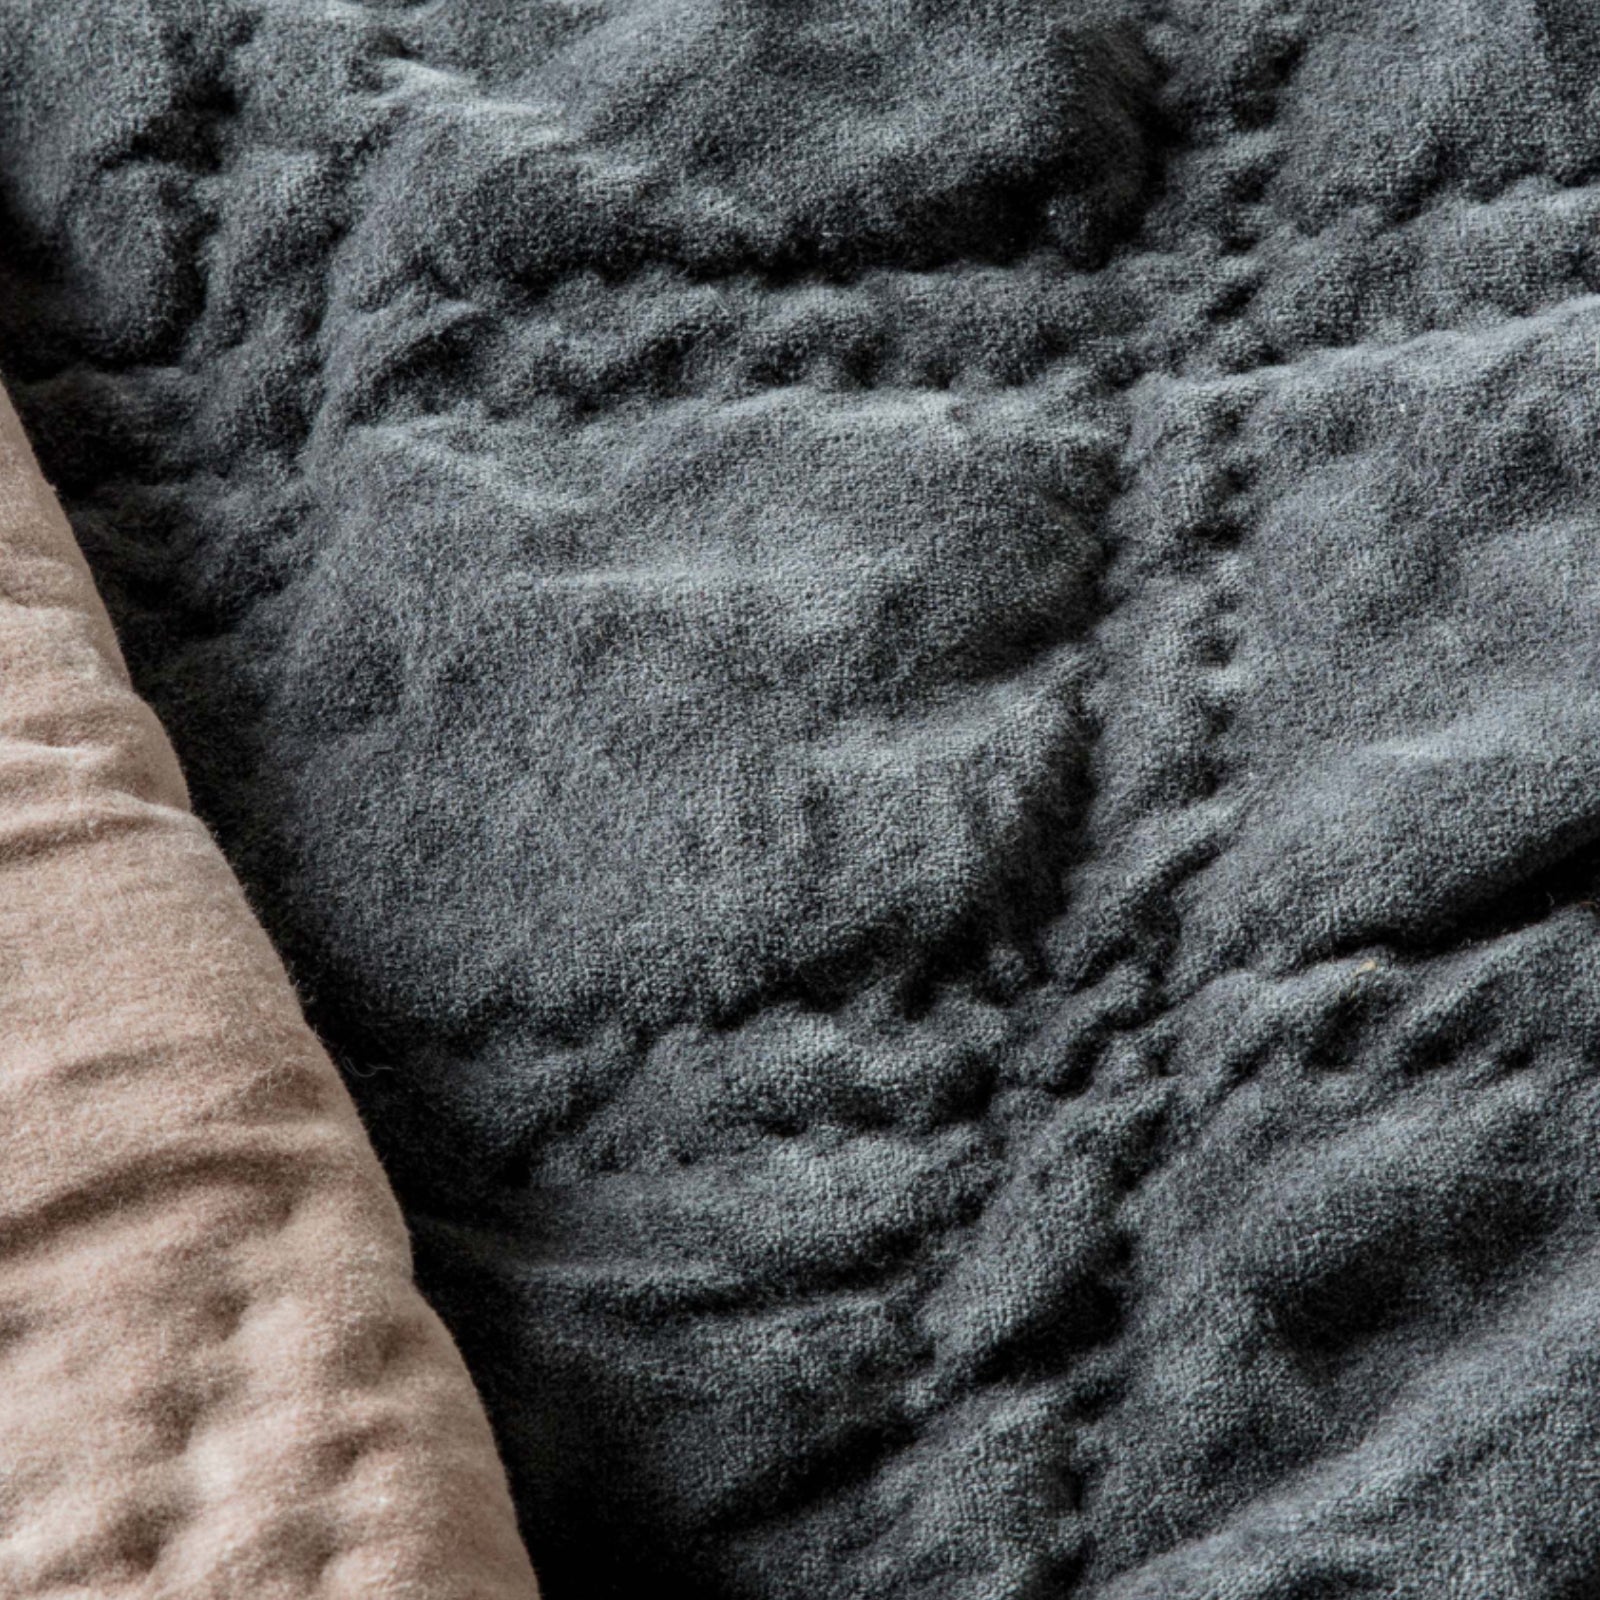 Dark Charcoal Quilted Diamond Bedspread - The Farthing